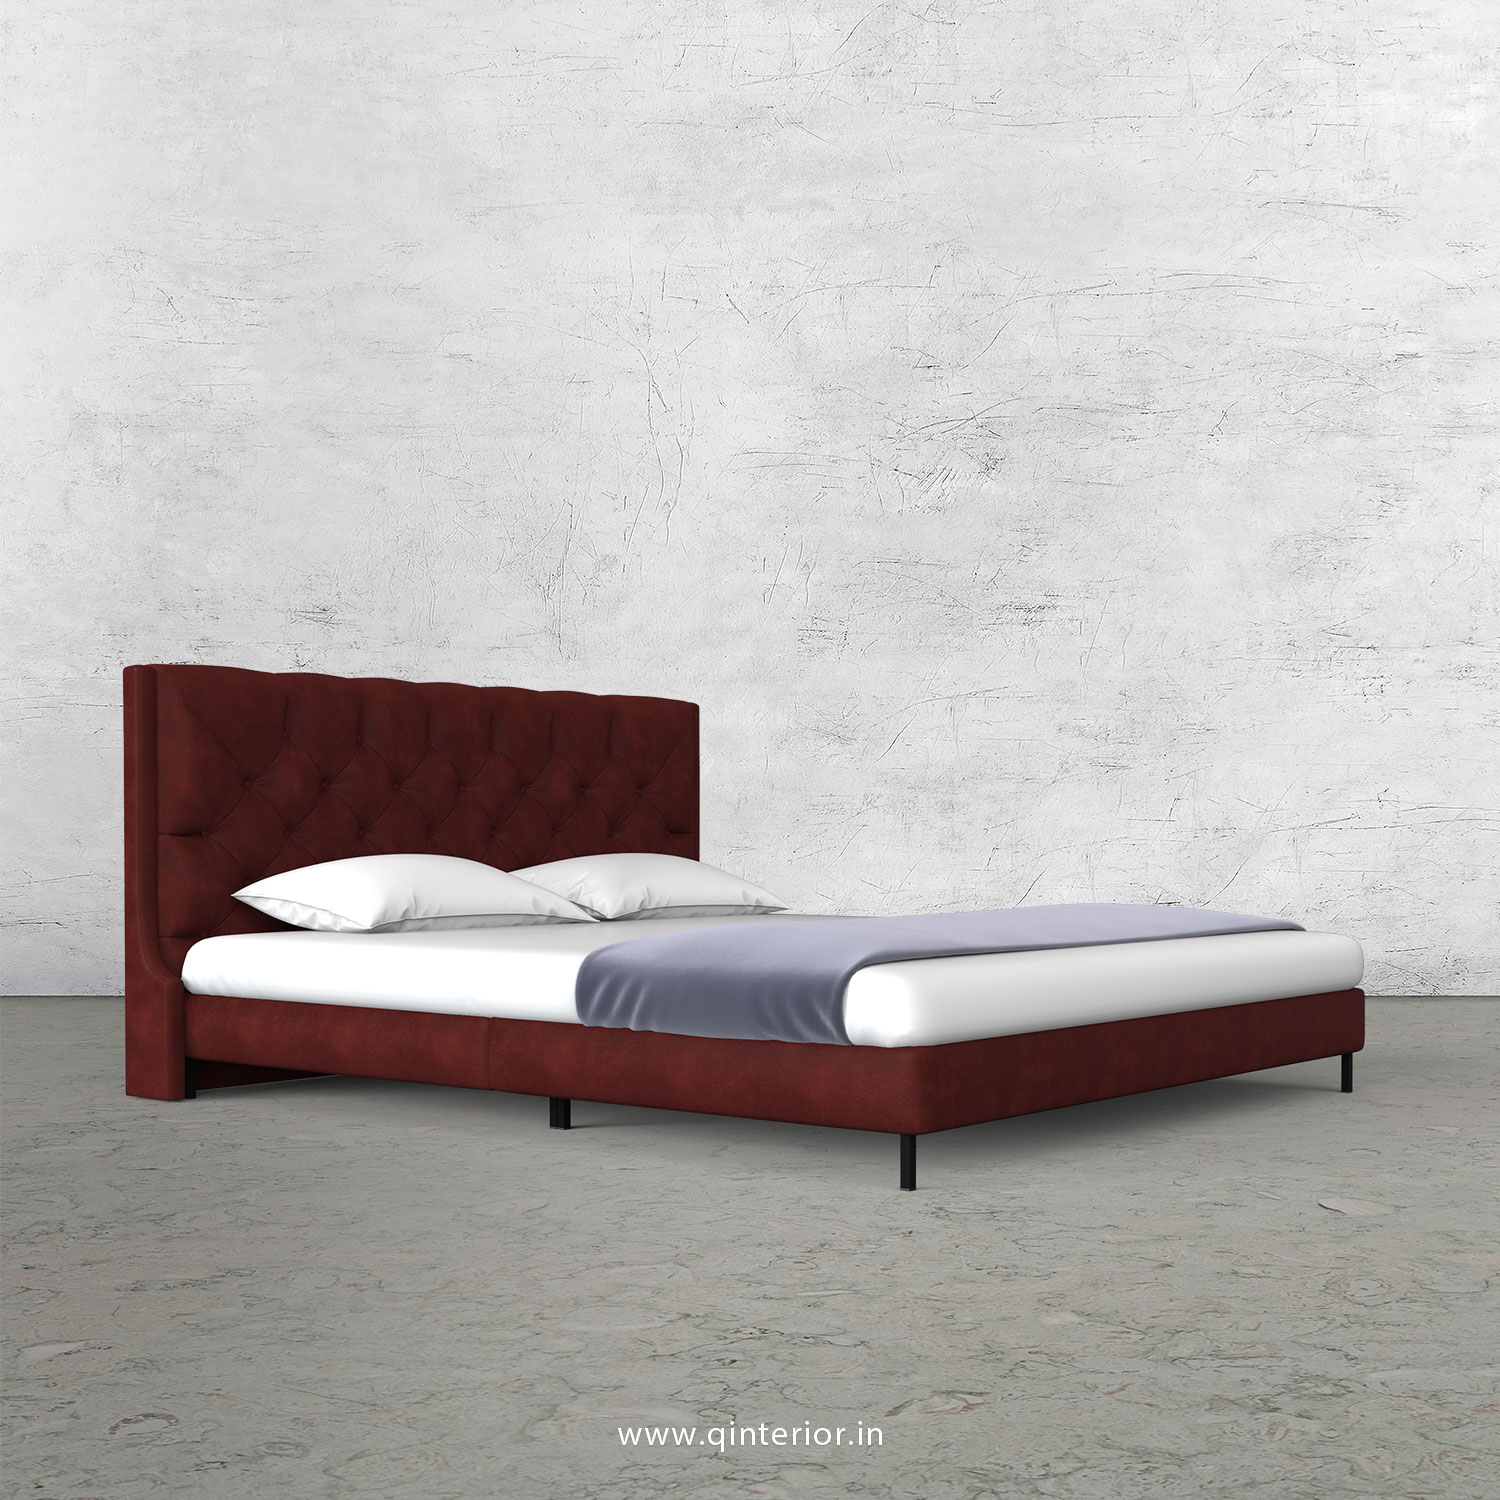 Scorpius King Size Bed in Fab Leather Fabric - KBD003 FL17